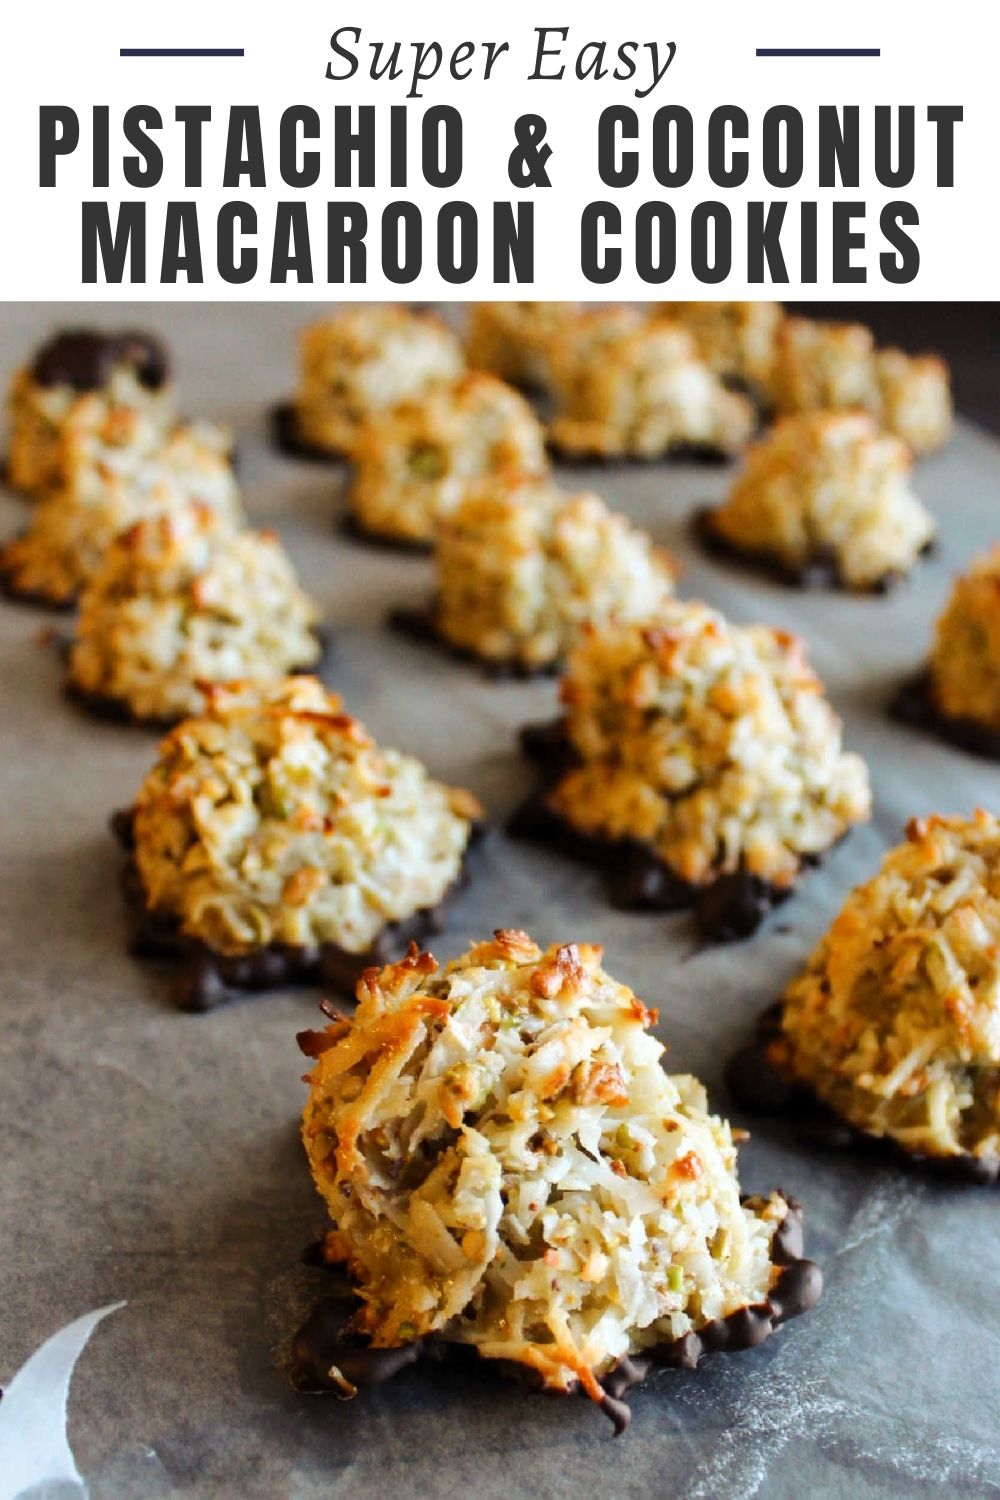 Yummy coconut pistachio macaroons are naturally gluten free, super simple to make and they taste amazing. They are chewy with a little bit of crunch and an optional dunk in chocolate makes them extra delicious.